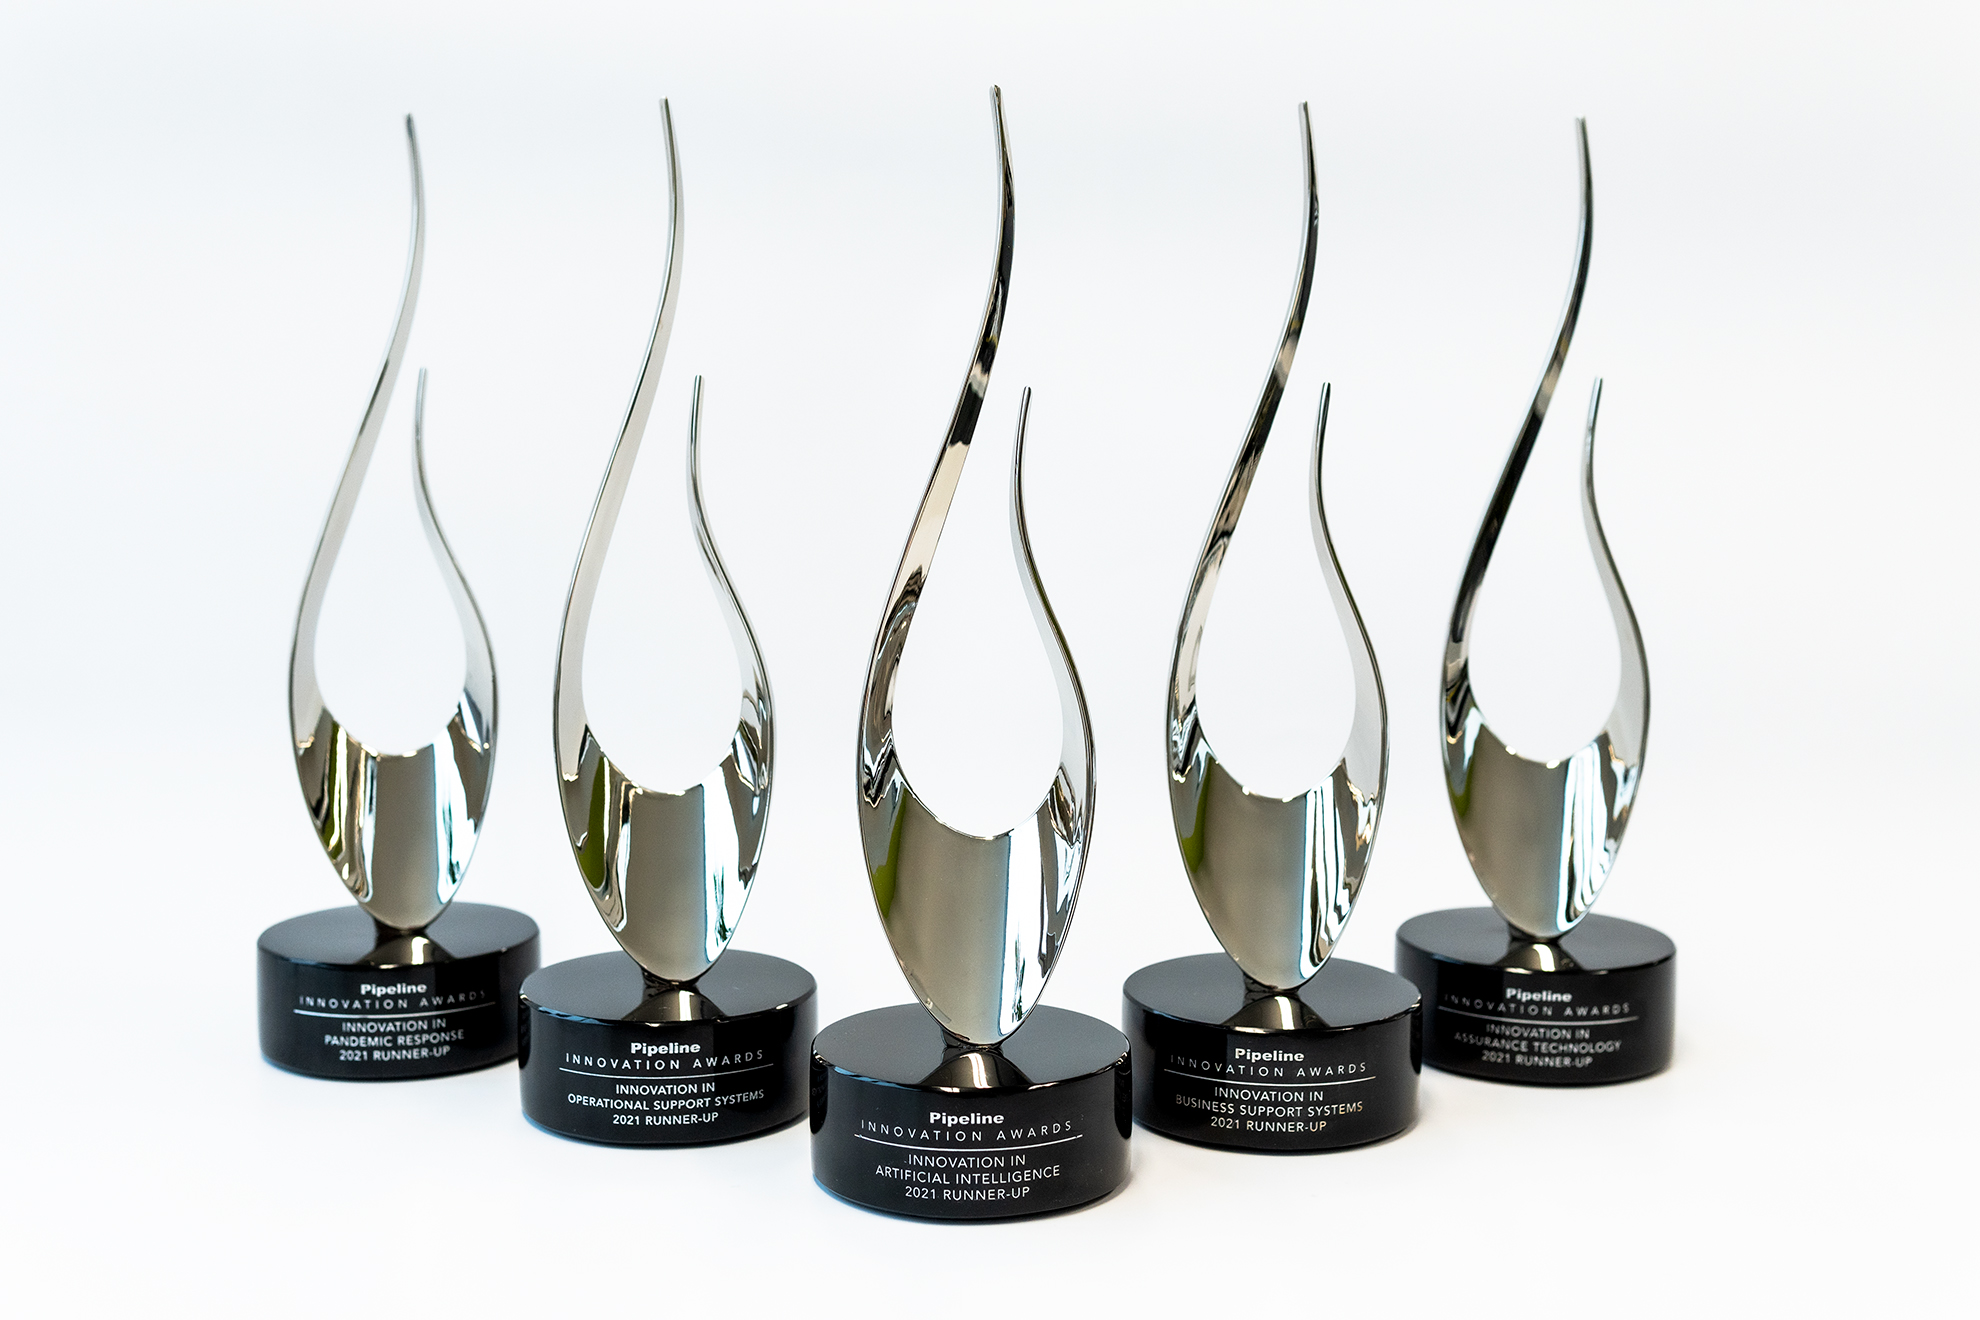 Comarch Recognized for Innovation in Five Different Categories